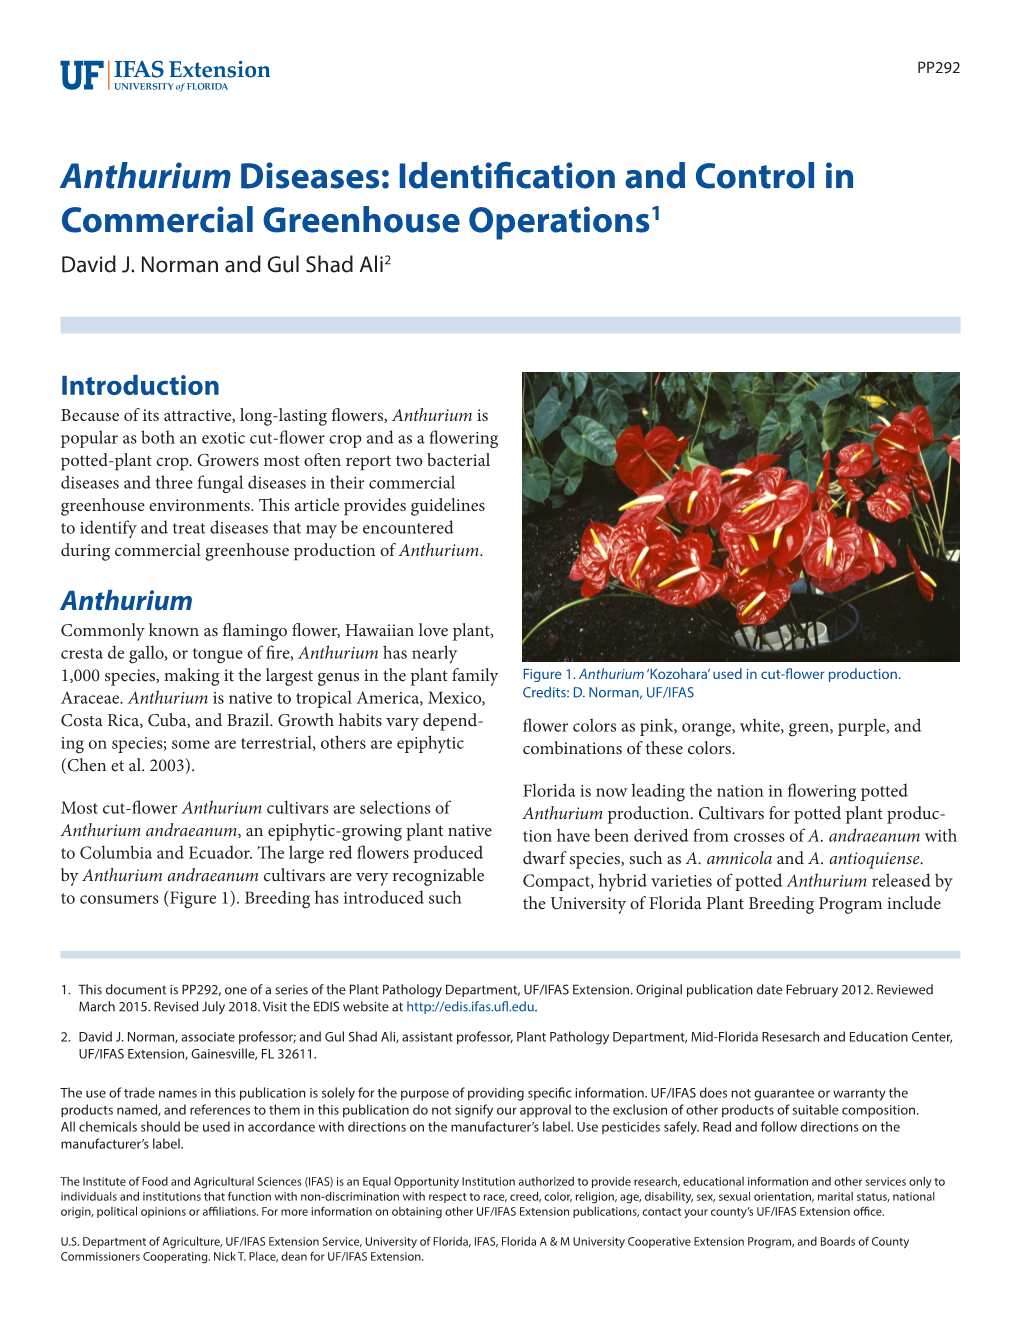 Anthurium Diseases: Identification and Control in Commercial Greenhouse Operations1 David J